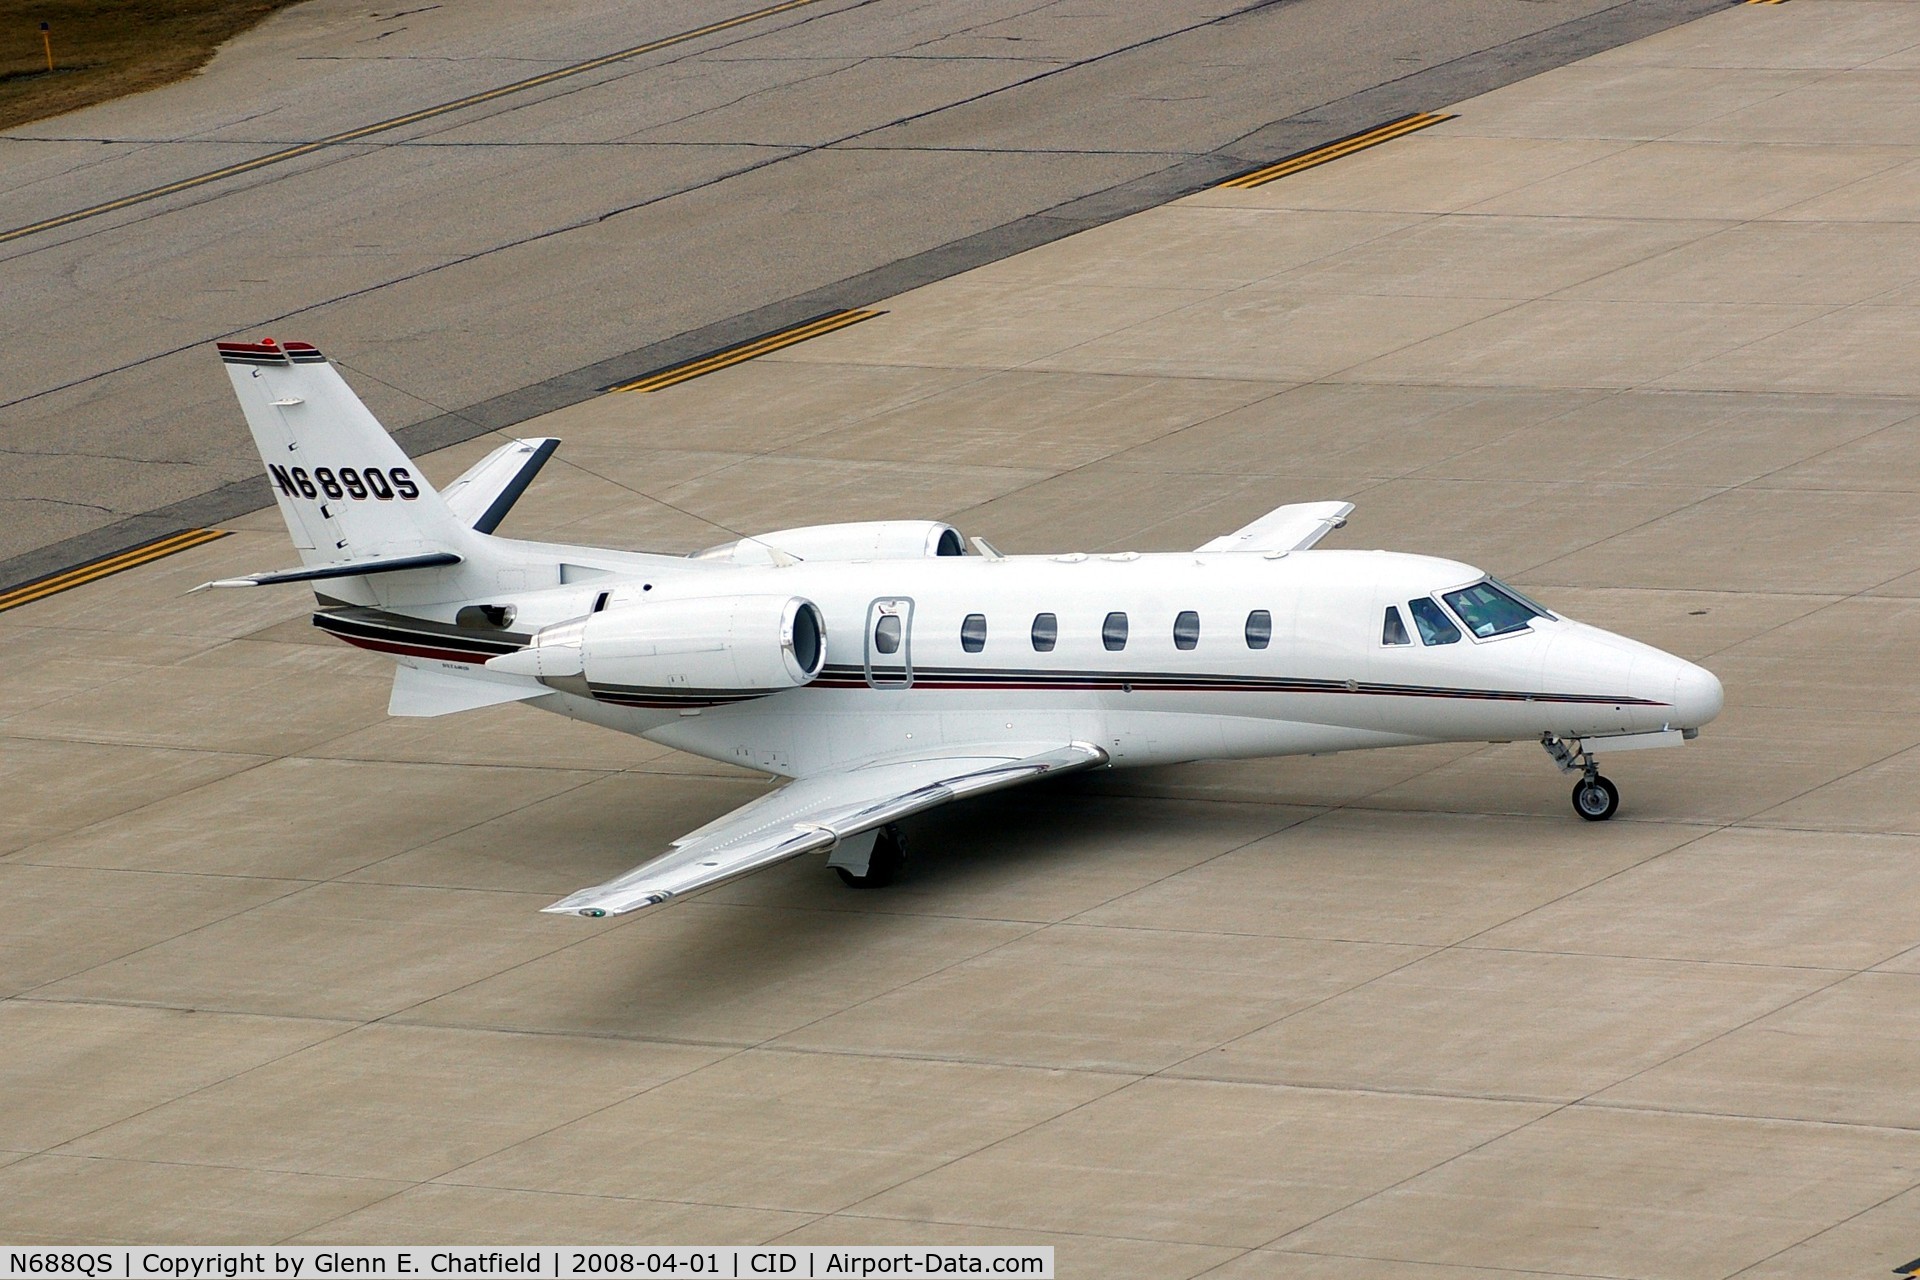 N688QS, 2001 Cessna 560XL C/N 560-5188, Executive Jet 688 taxiing in to Landmark